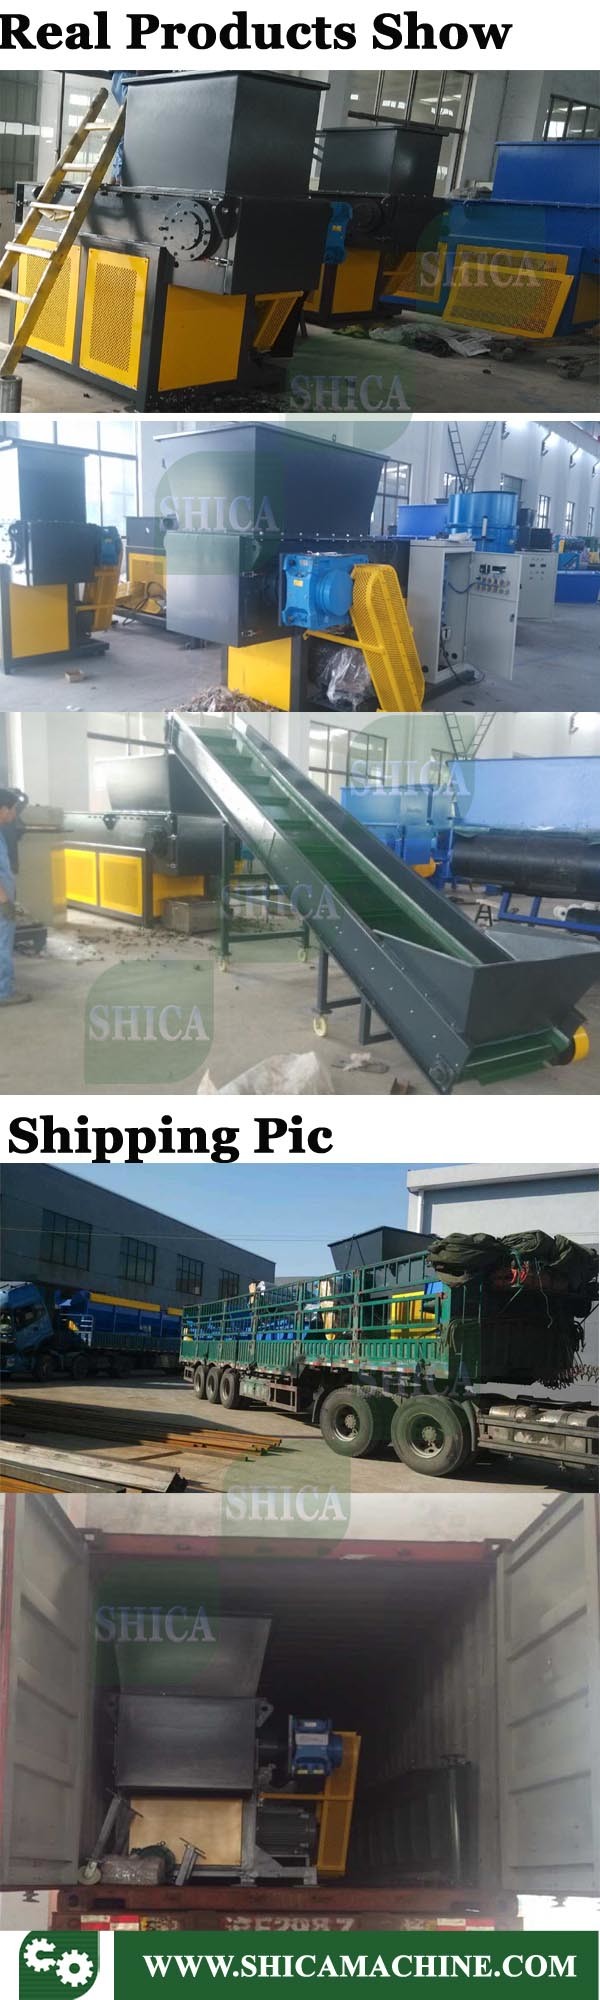 Strong Plastic Recycle Machine for Waste Plastic Fiber, Woven Bag